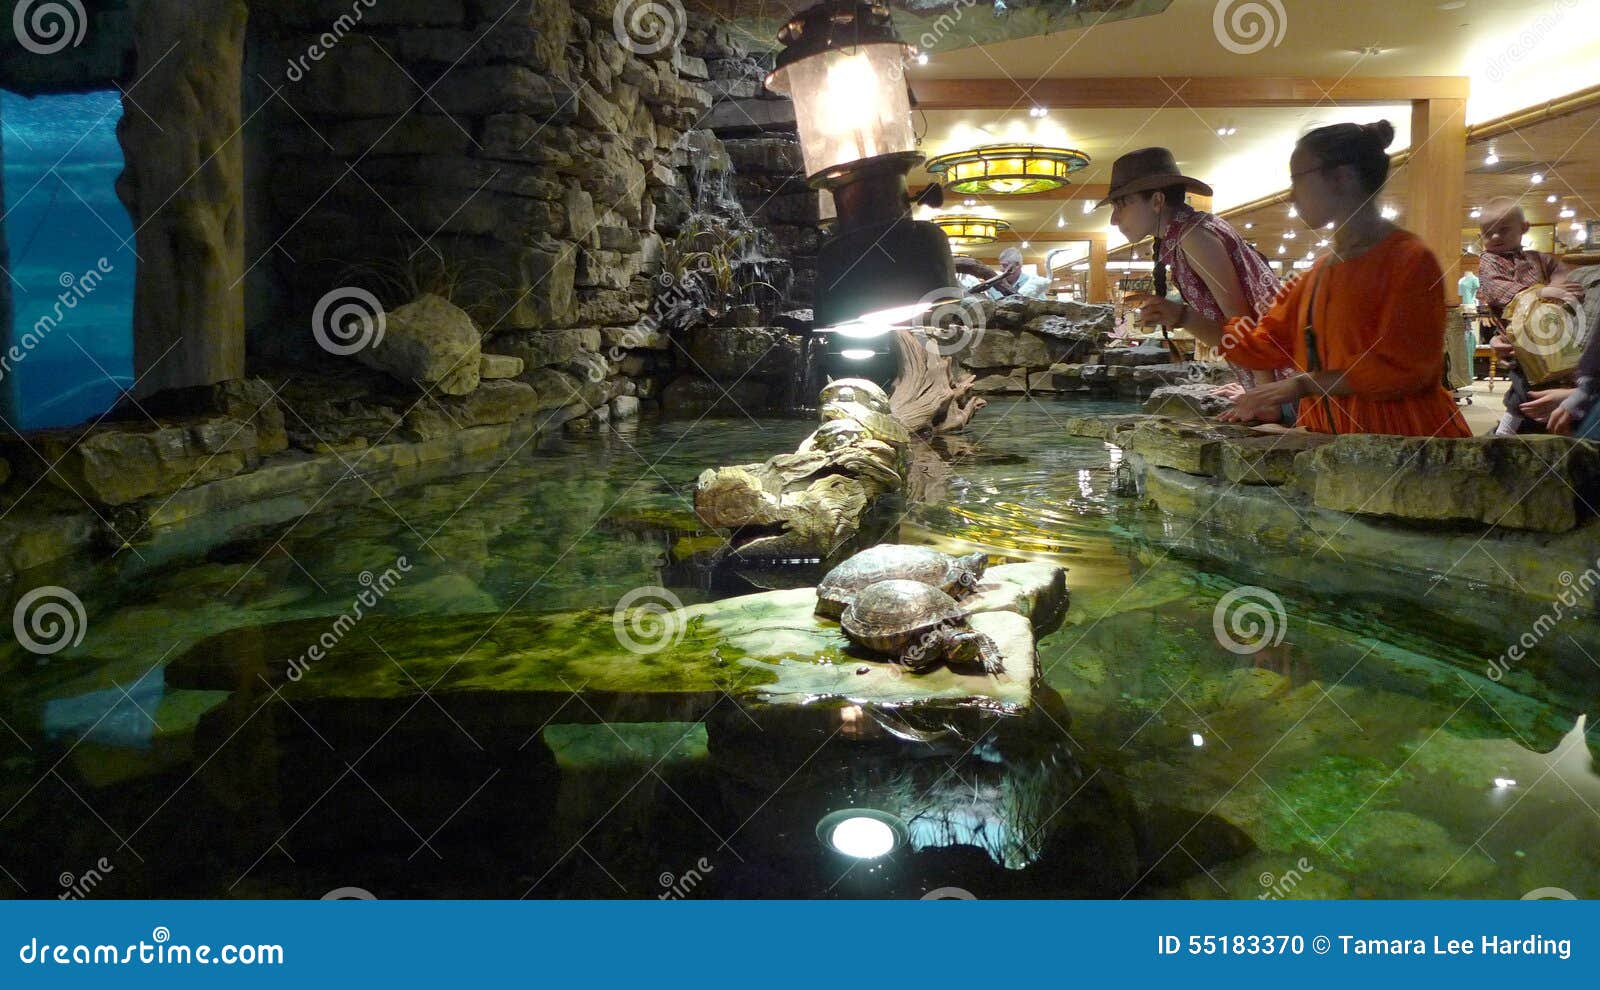 Bass Pro Shops, Springfield, MO Turtle Display Editorial Image